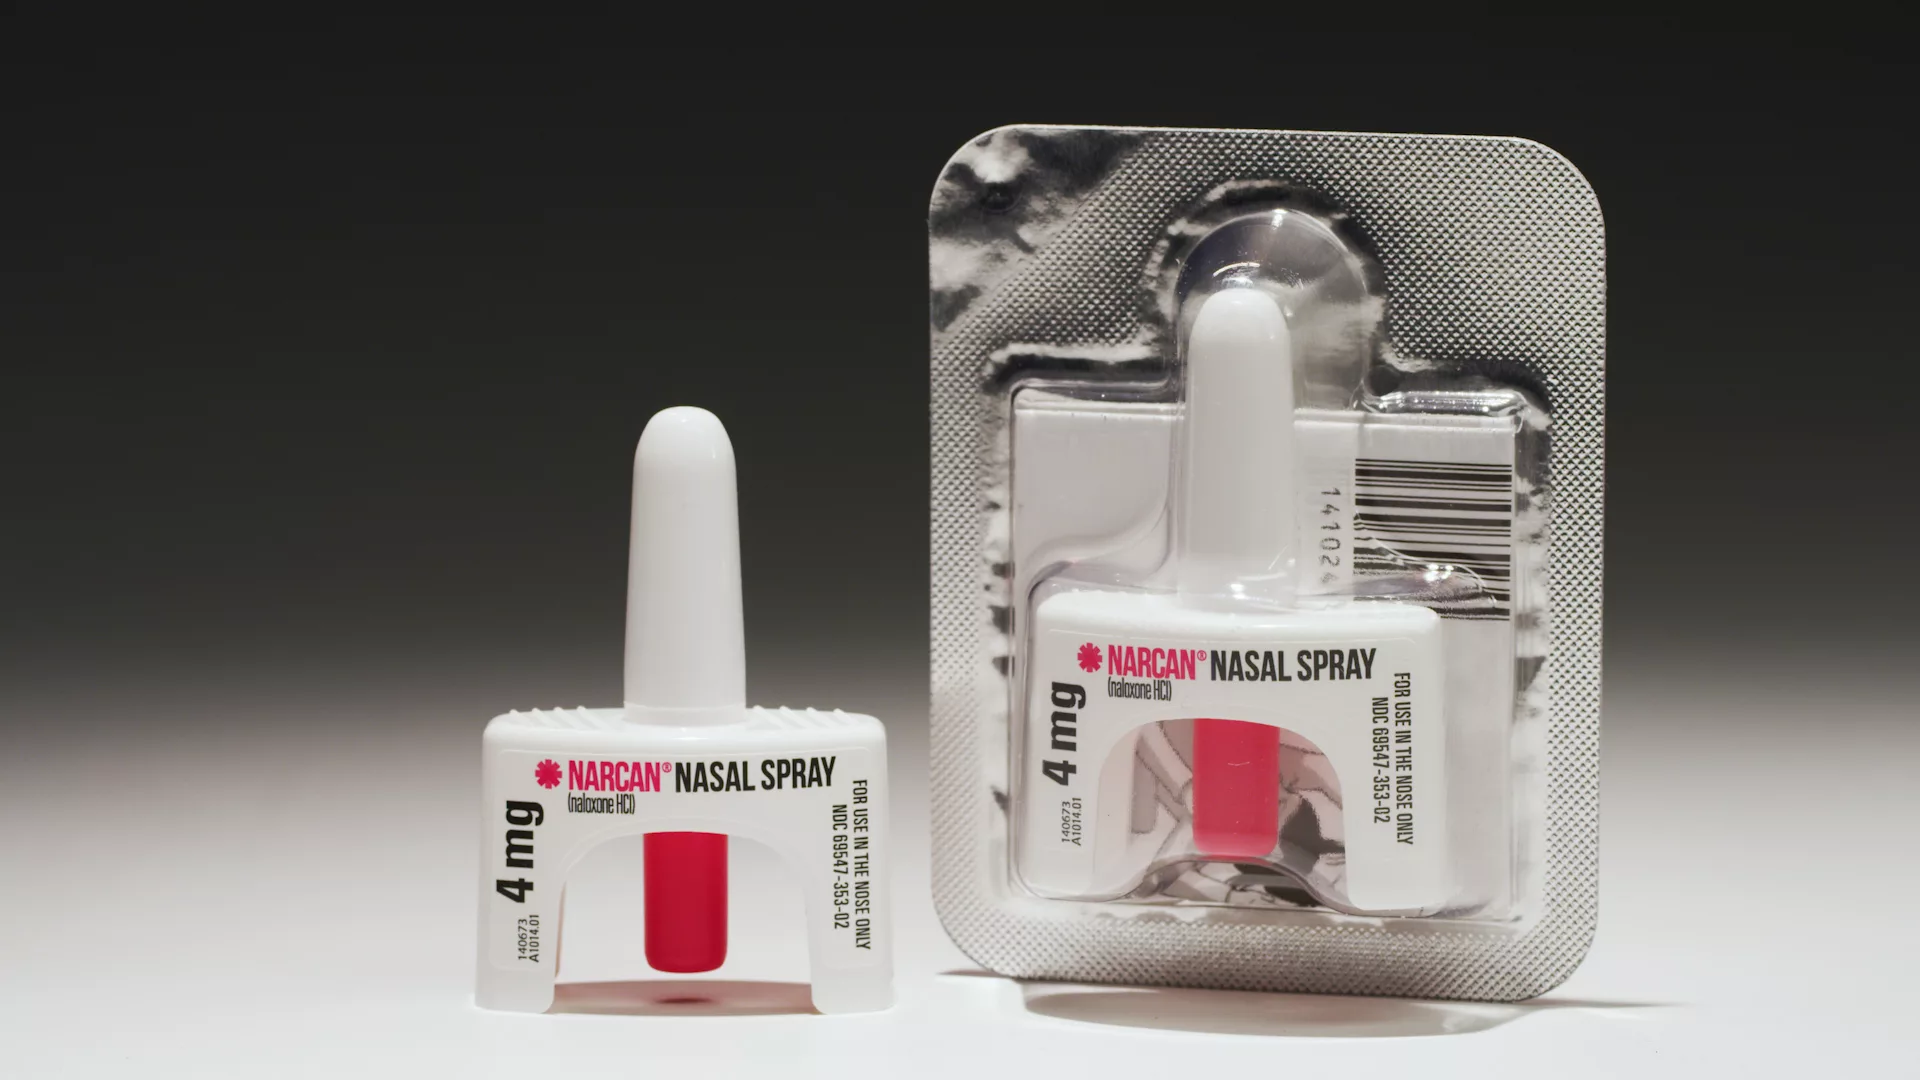 White House urges all schools to carry naloxone, the opioid overdose reversal drug